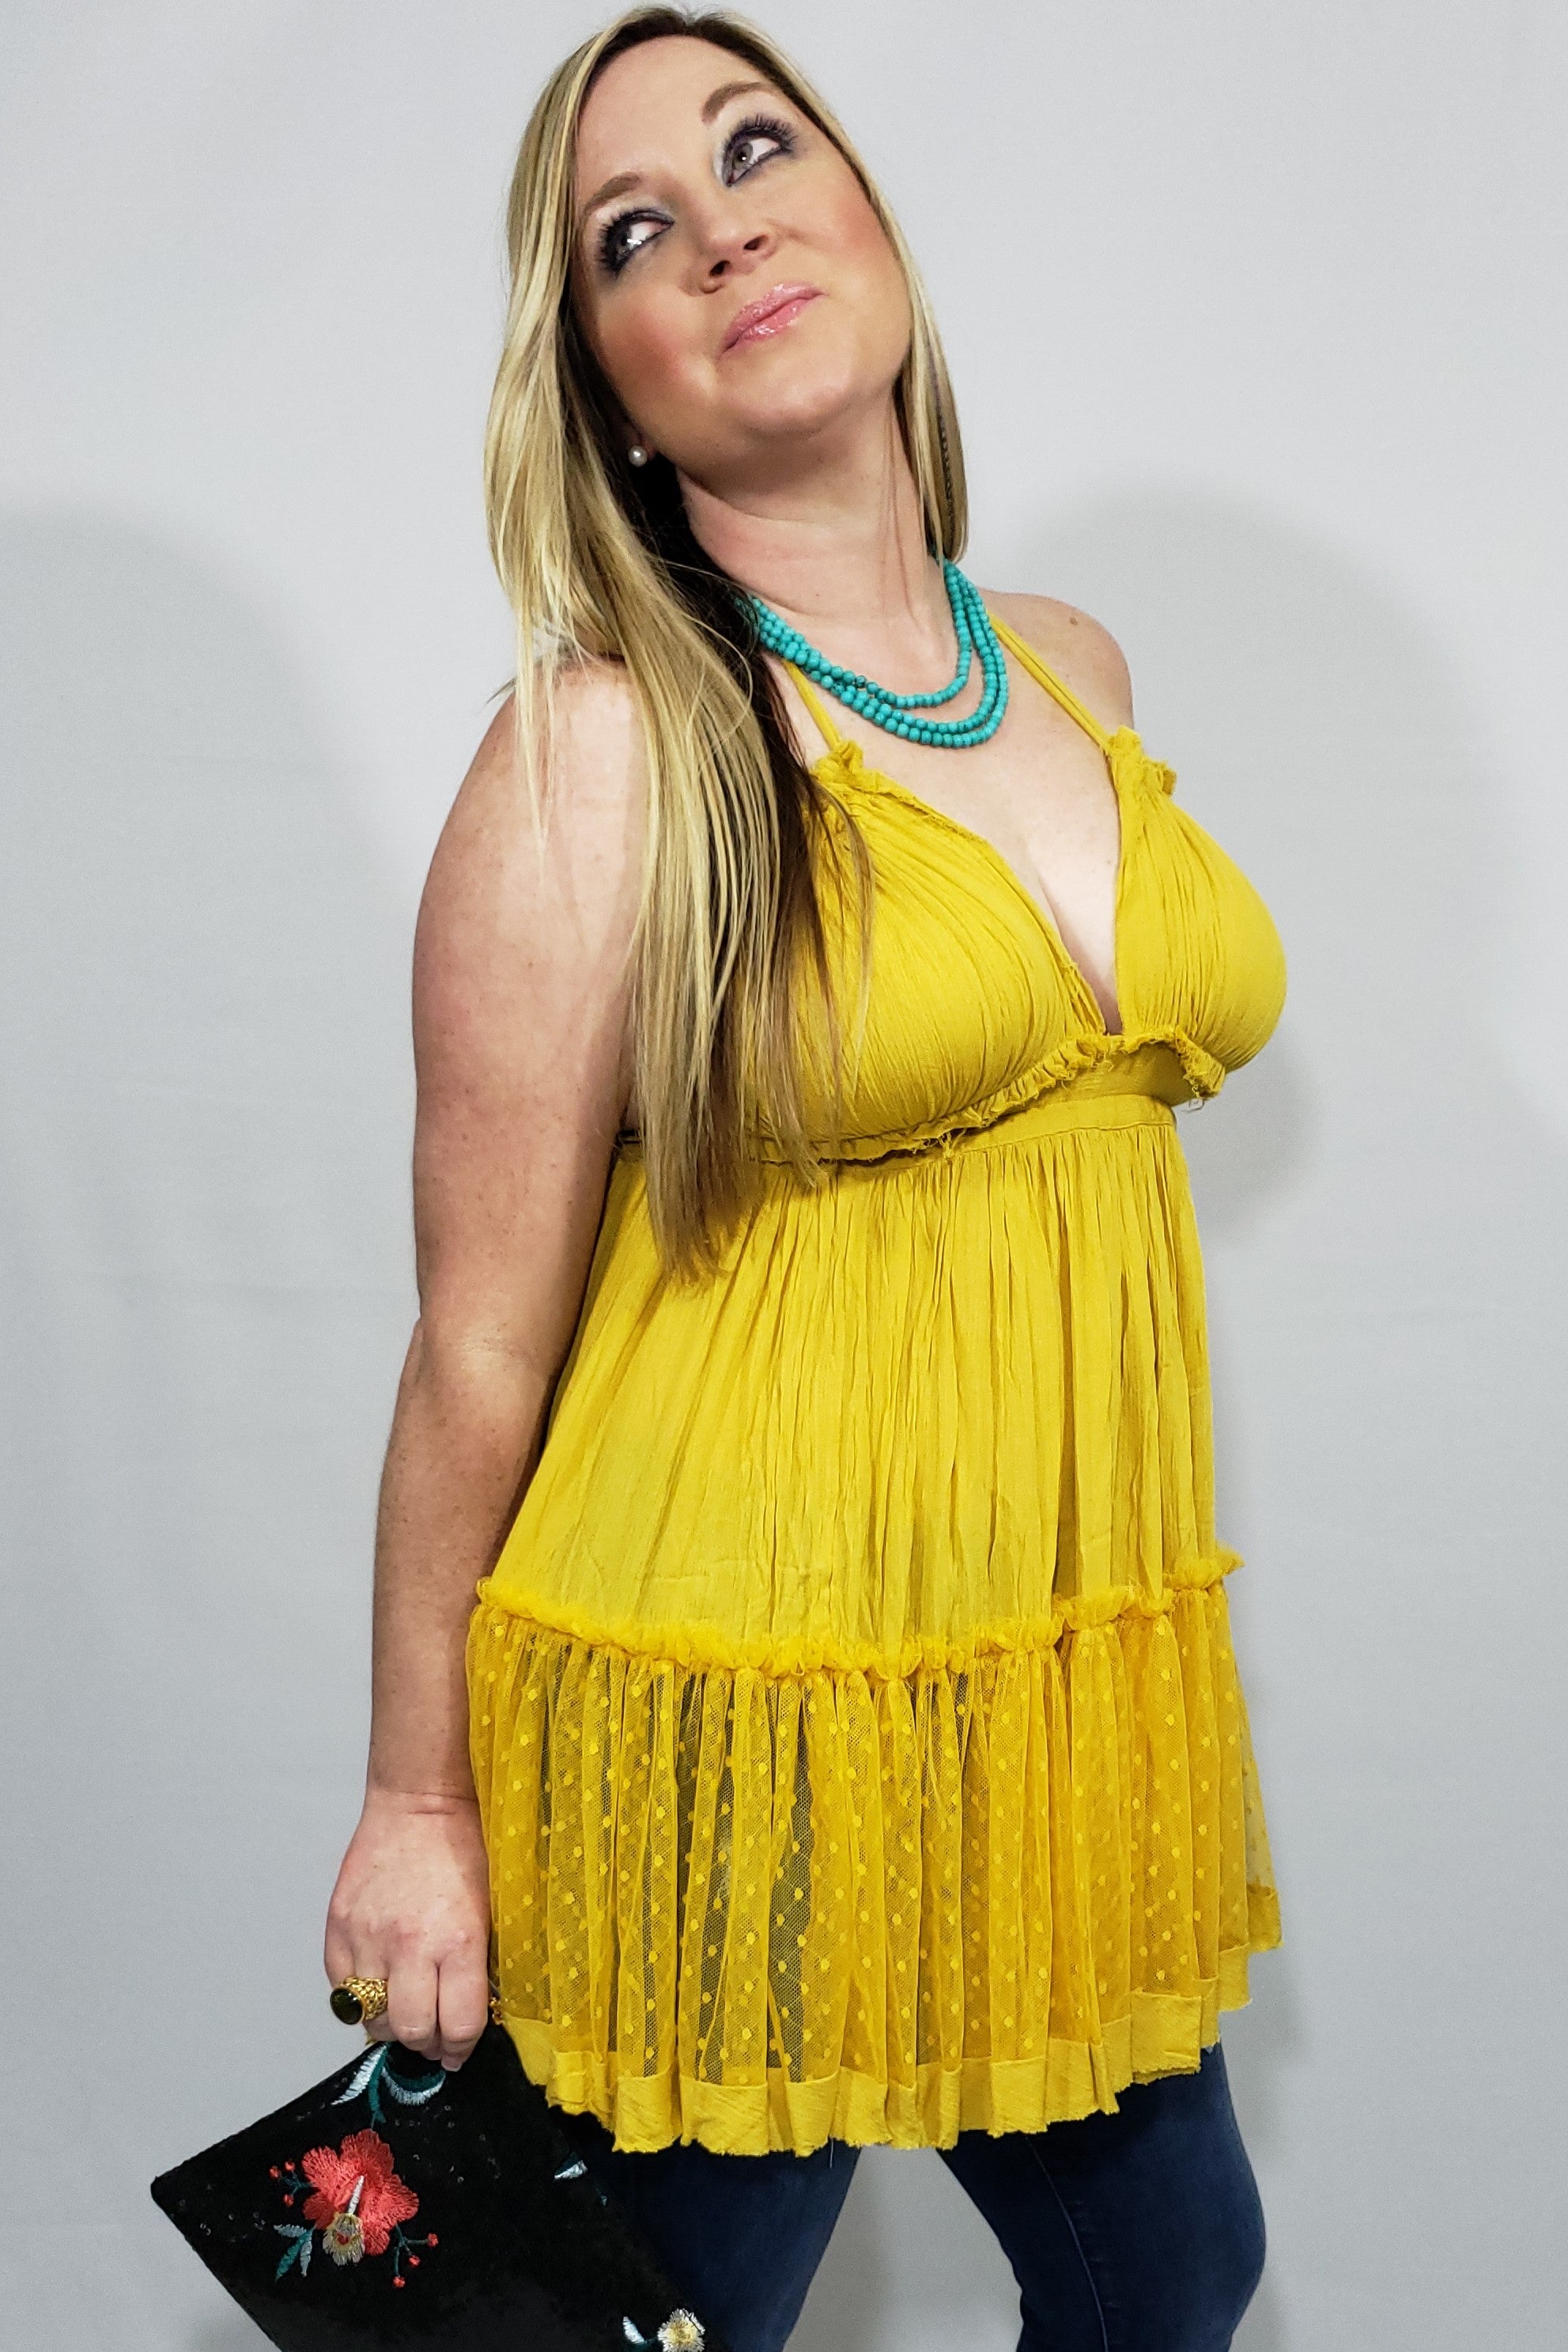 Caribbean Queen Lace Tunic - Houzz of DVA Boutique